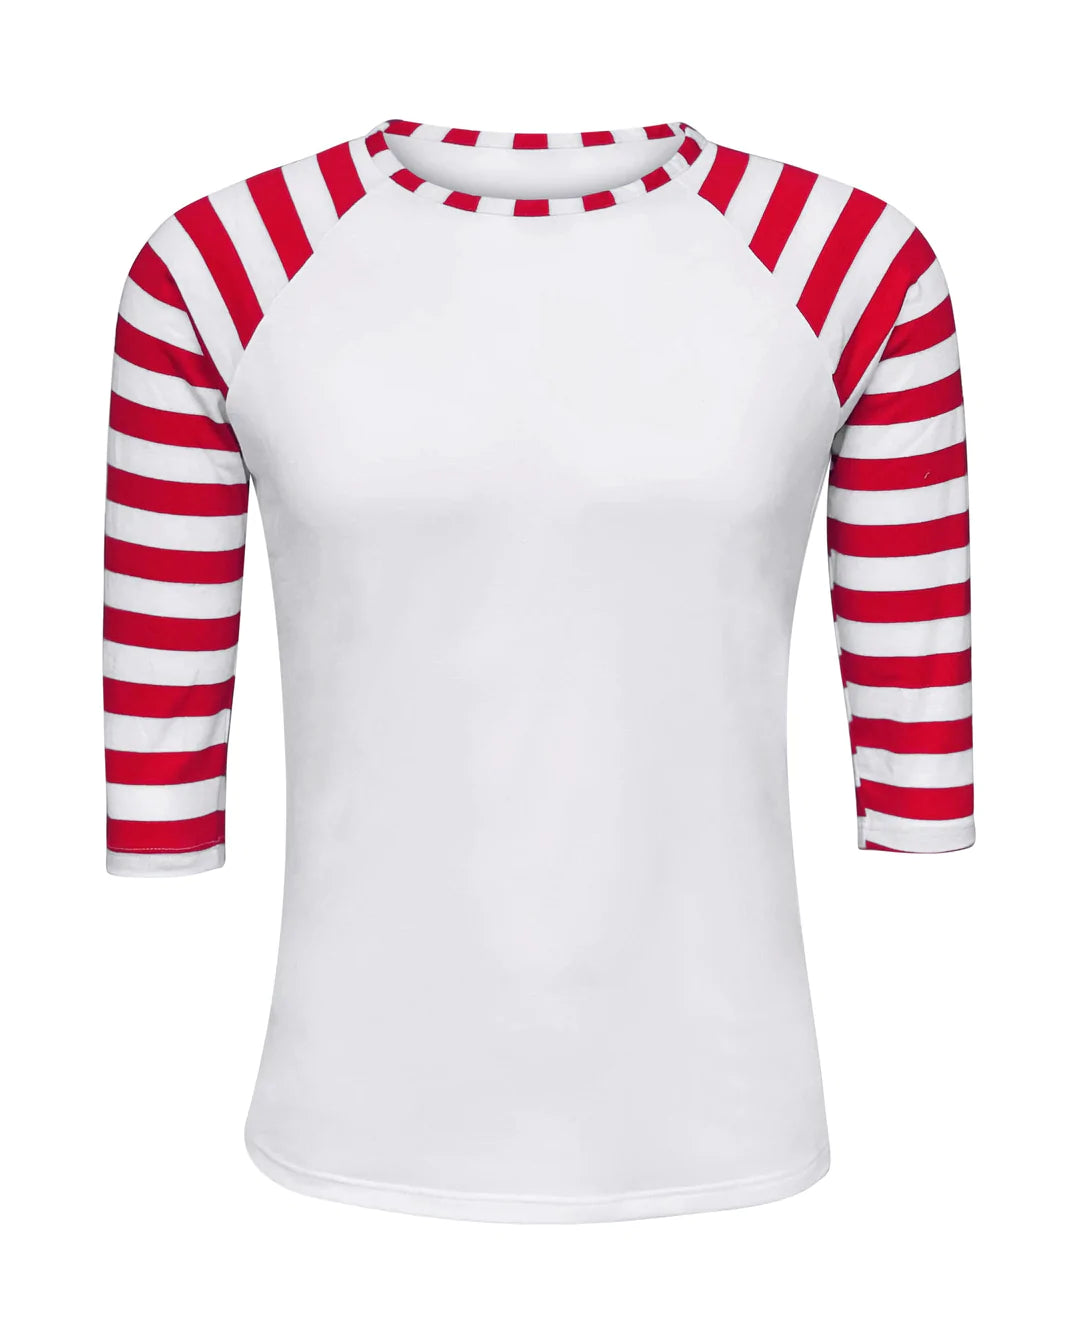 Christmas Adult Sublimation White Body Raglan with Candy Cane Striped Sleeves